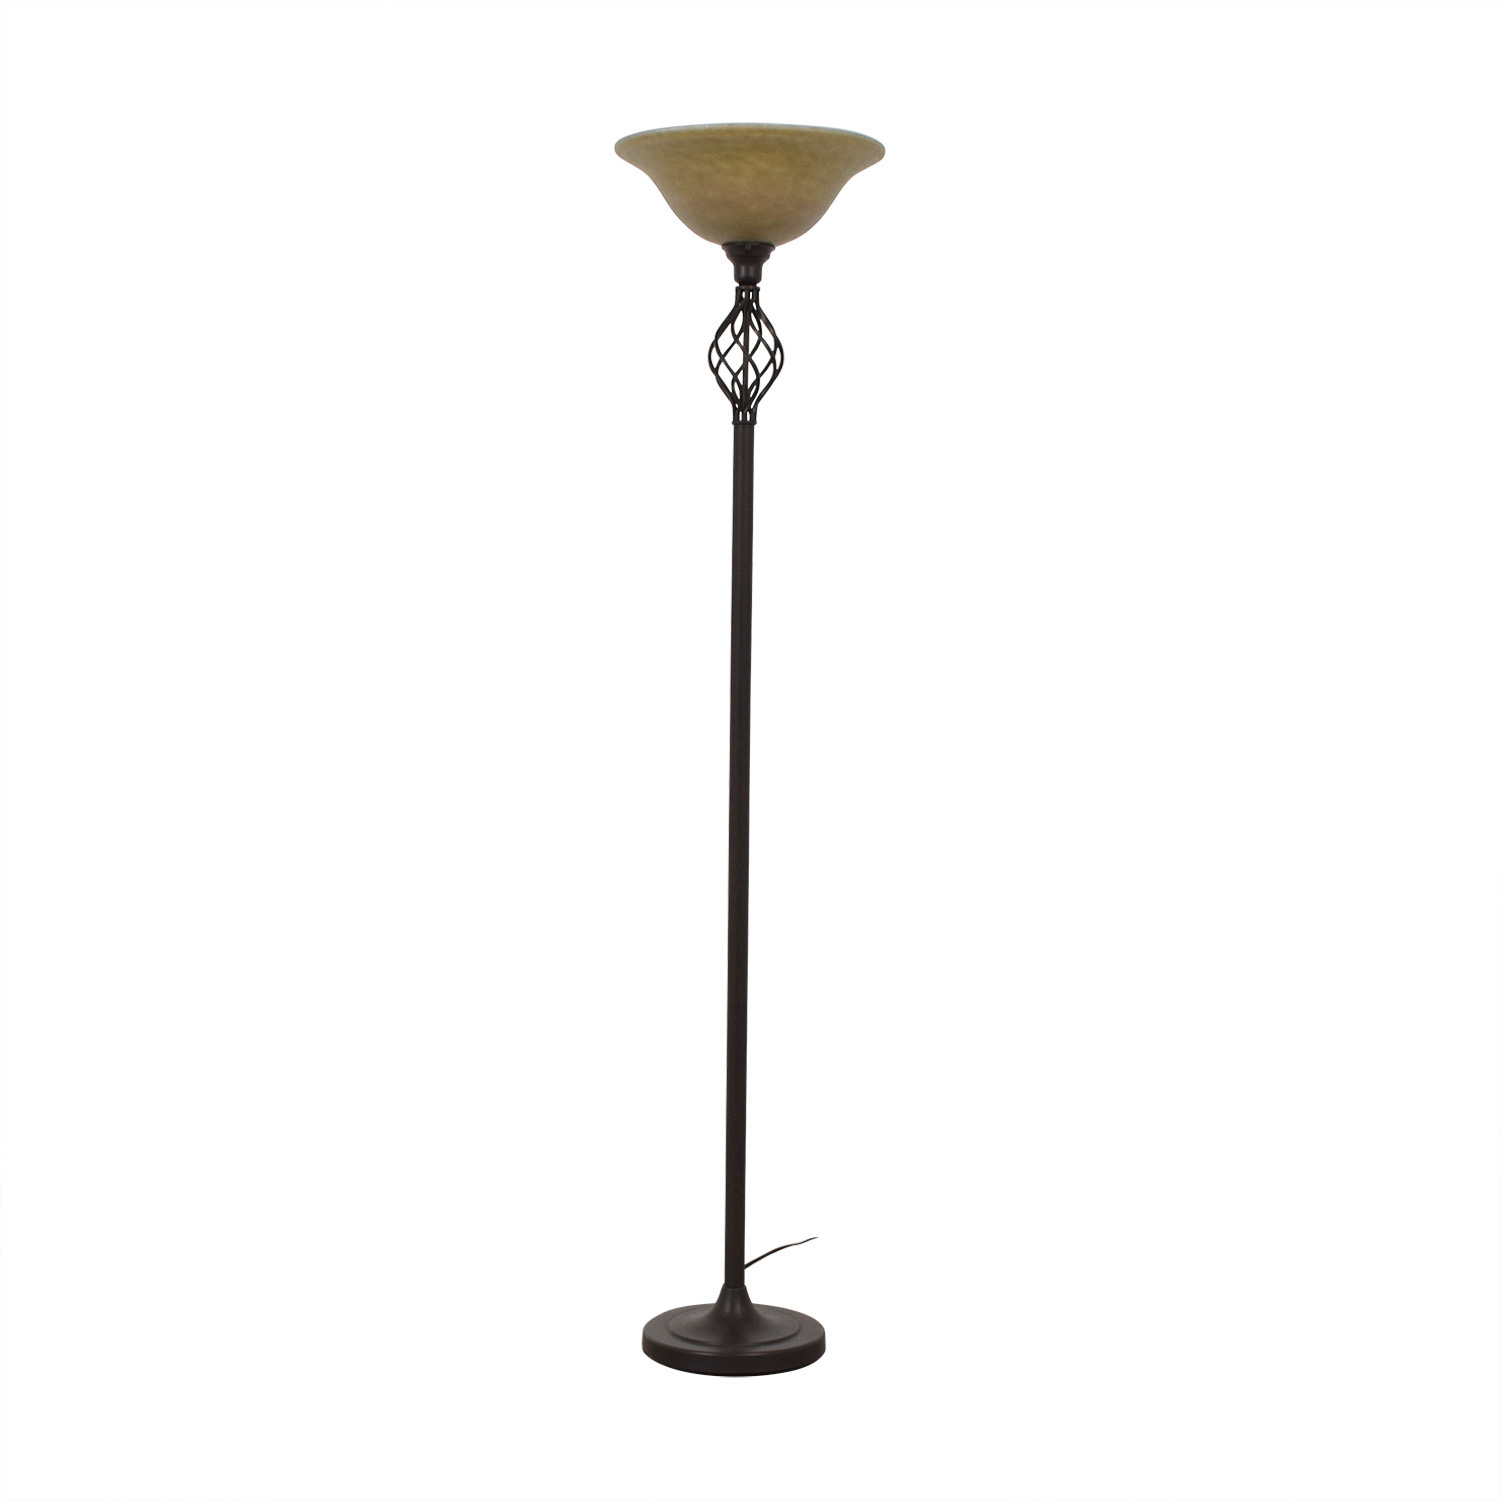 74 Off Bed Bath Beyond Bed Bath Beyond Halogen Floor Lamp Decor pertaining to dimensions 1500 X 1500